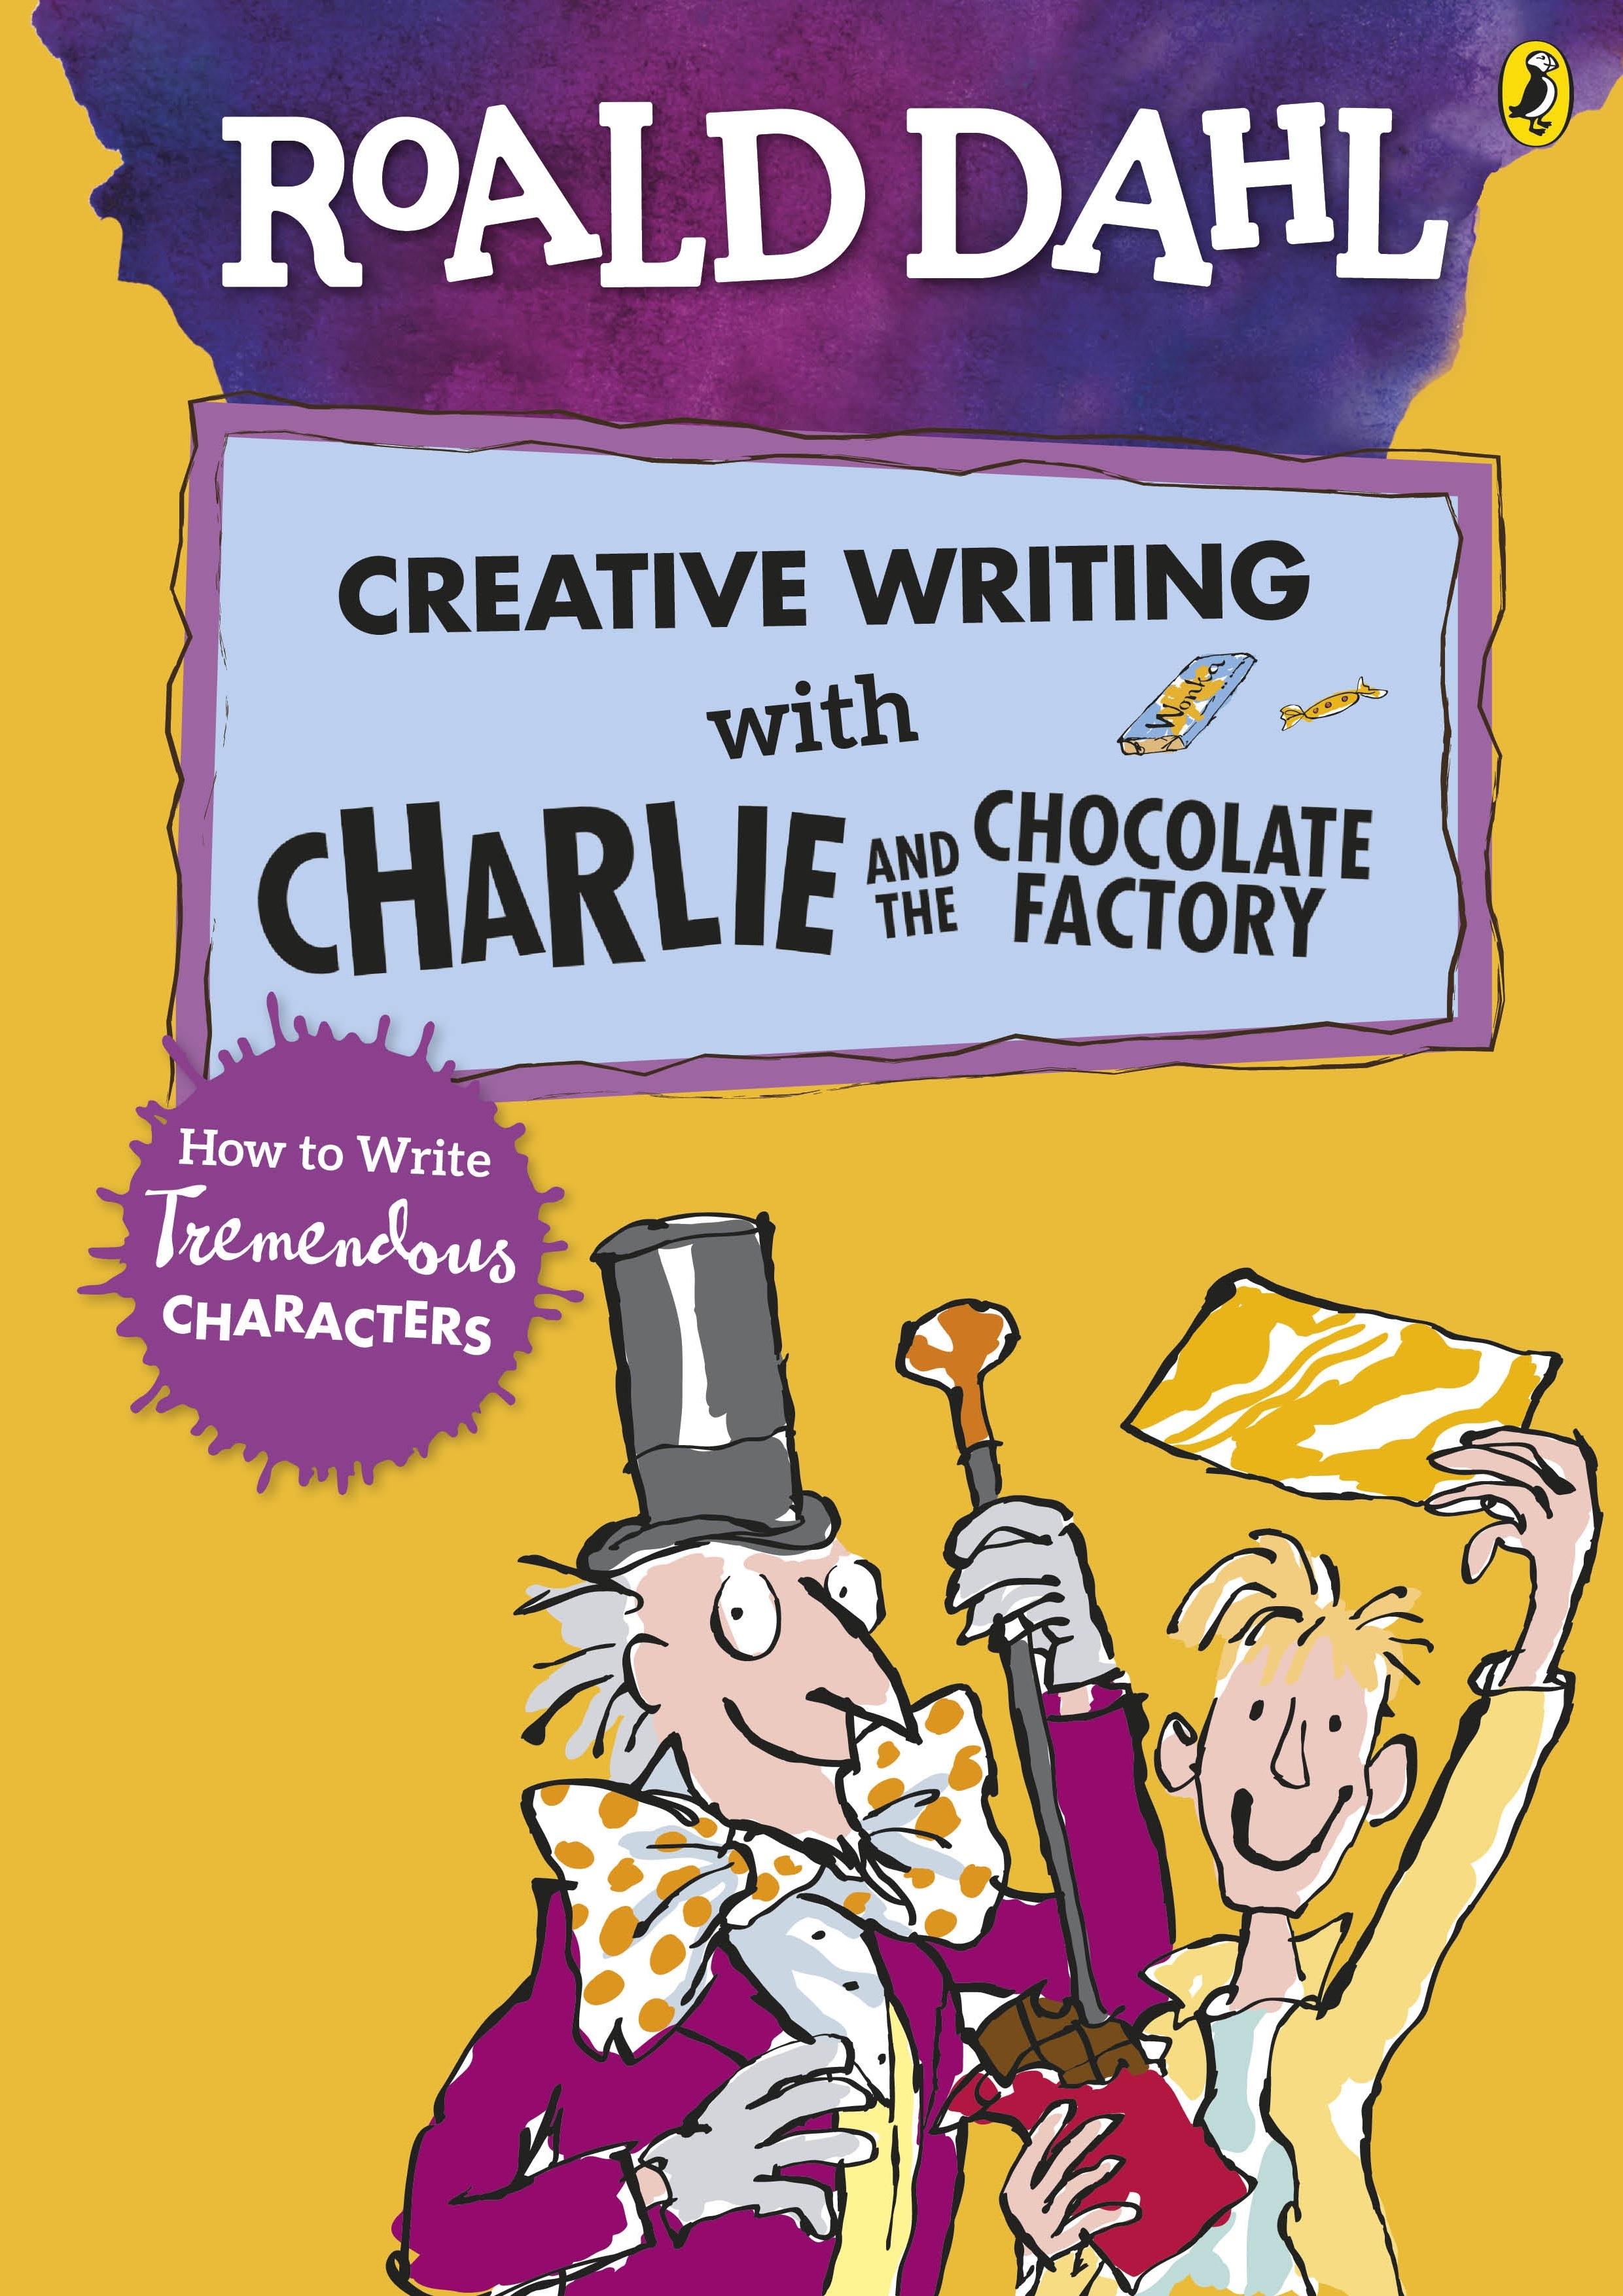 Book “Roald Dahl's Creative Writing with Charlie and the Chocolate Factory: How to Write Tremendous Characters” by Roald Dahl — January 24, 2019